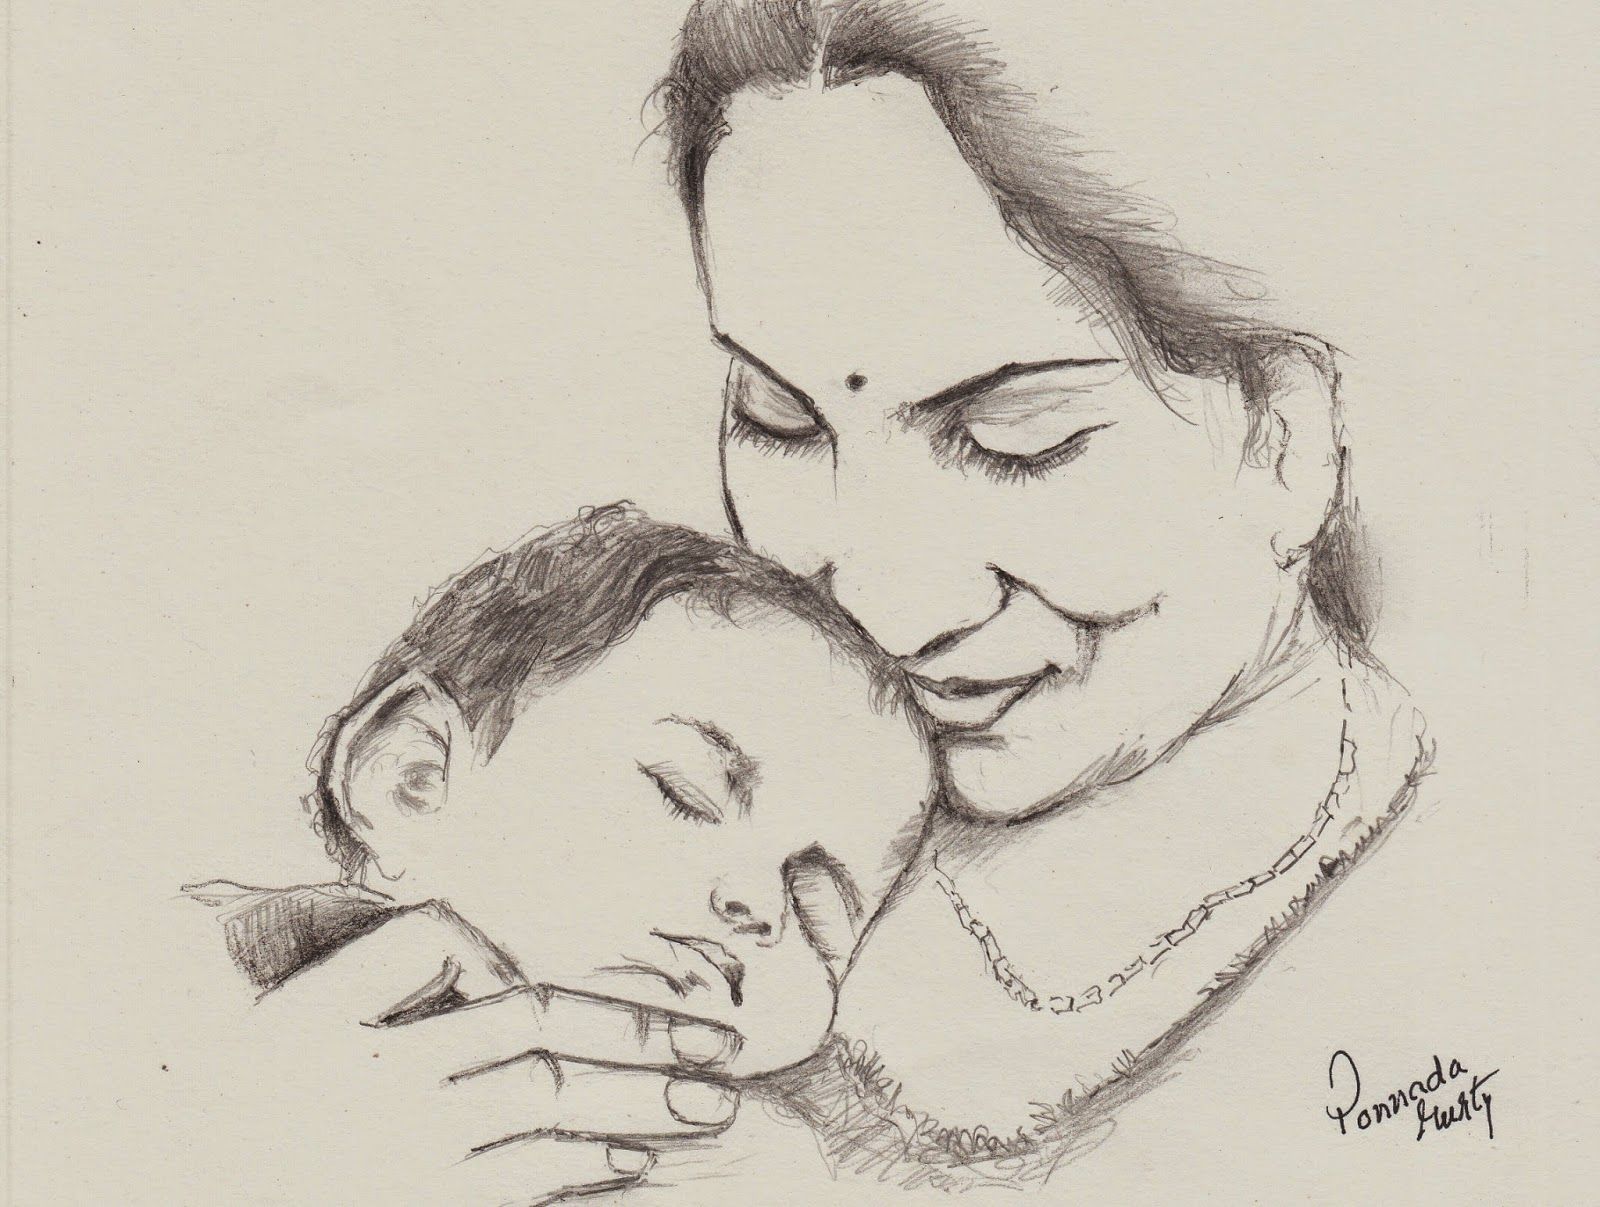 Sketches and Drawings, Indian mother sketch. Pencil art drawings, Mothers day drawings, Pencil sketch